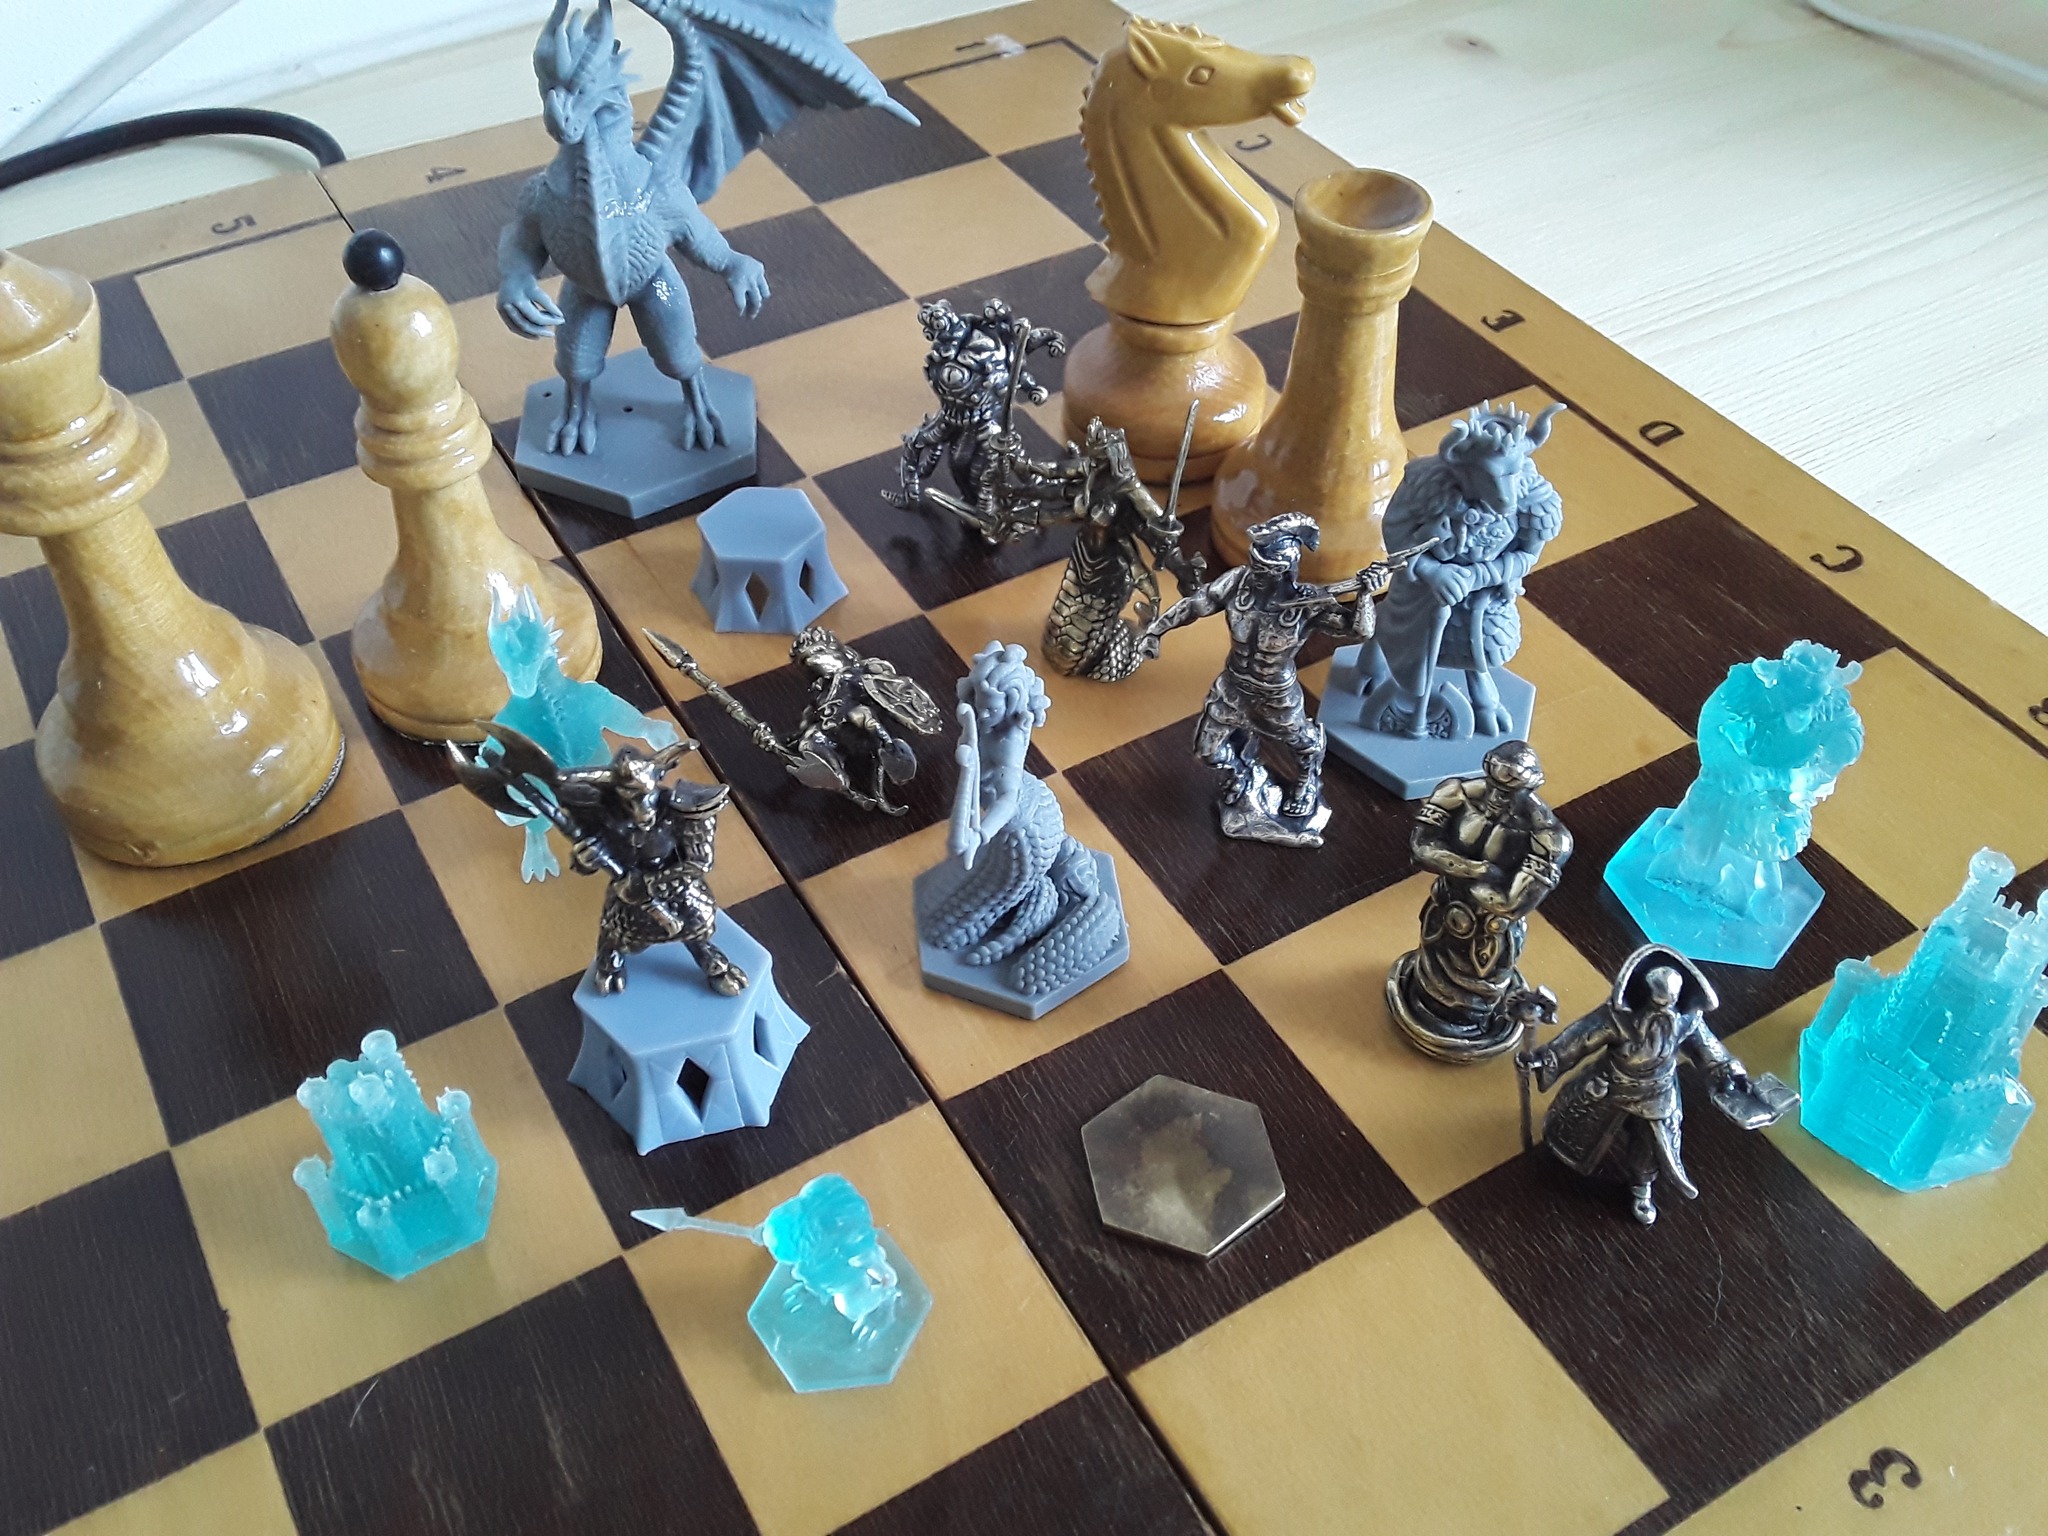 heroes chess minifigurines on chess board